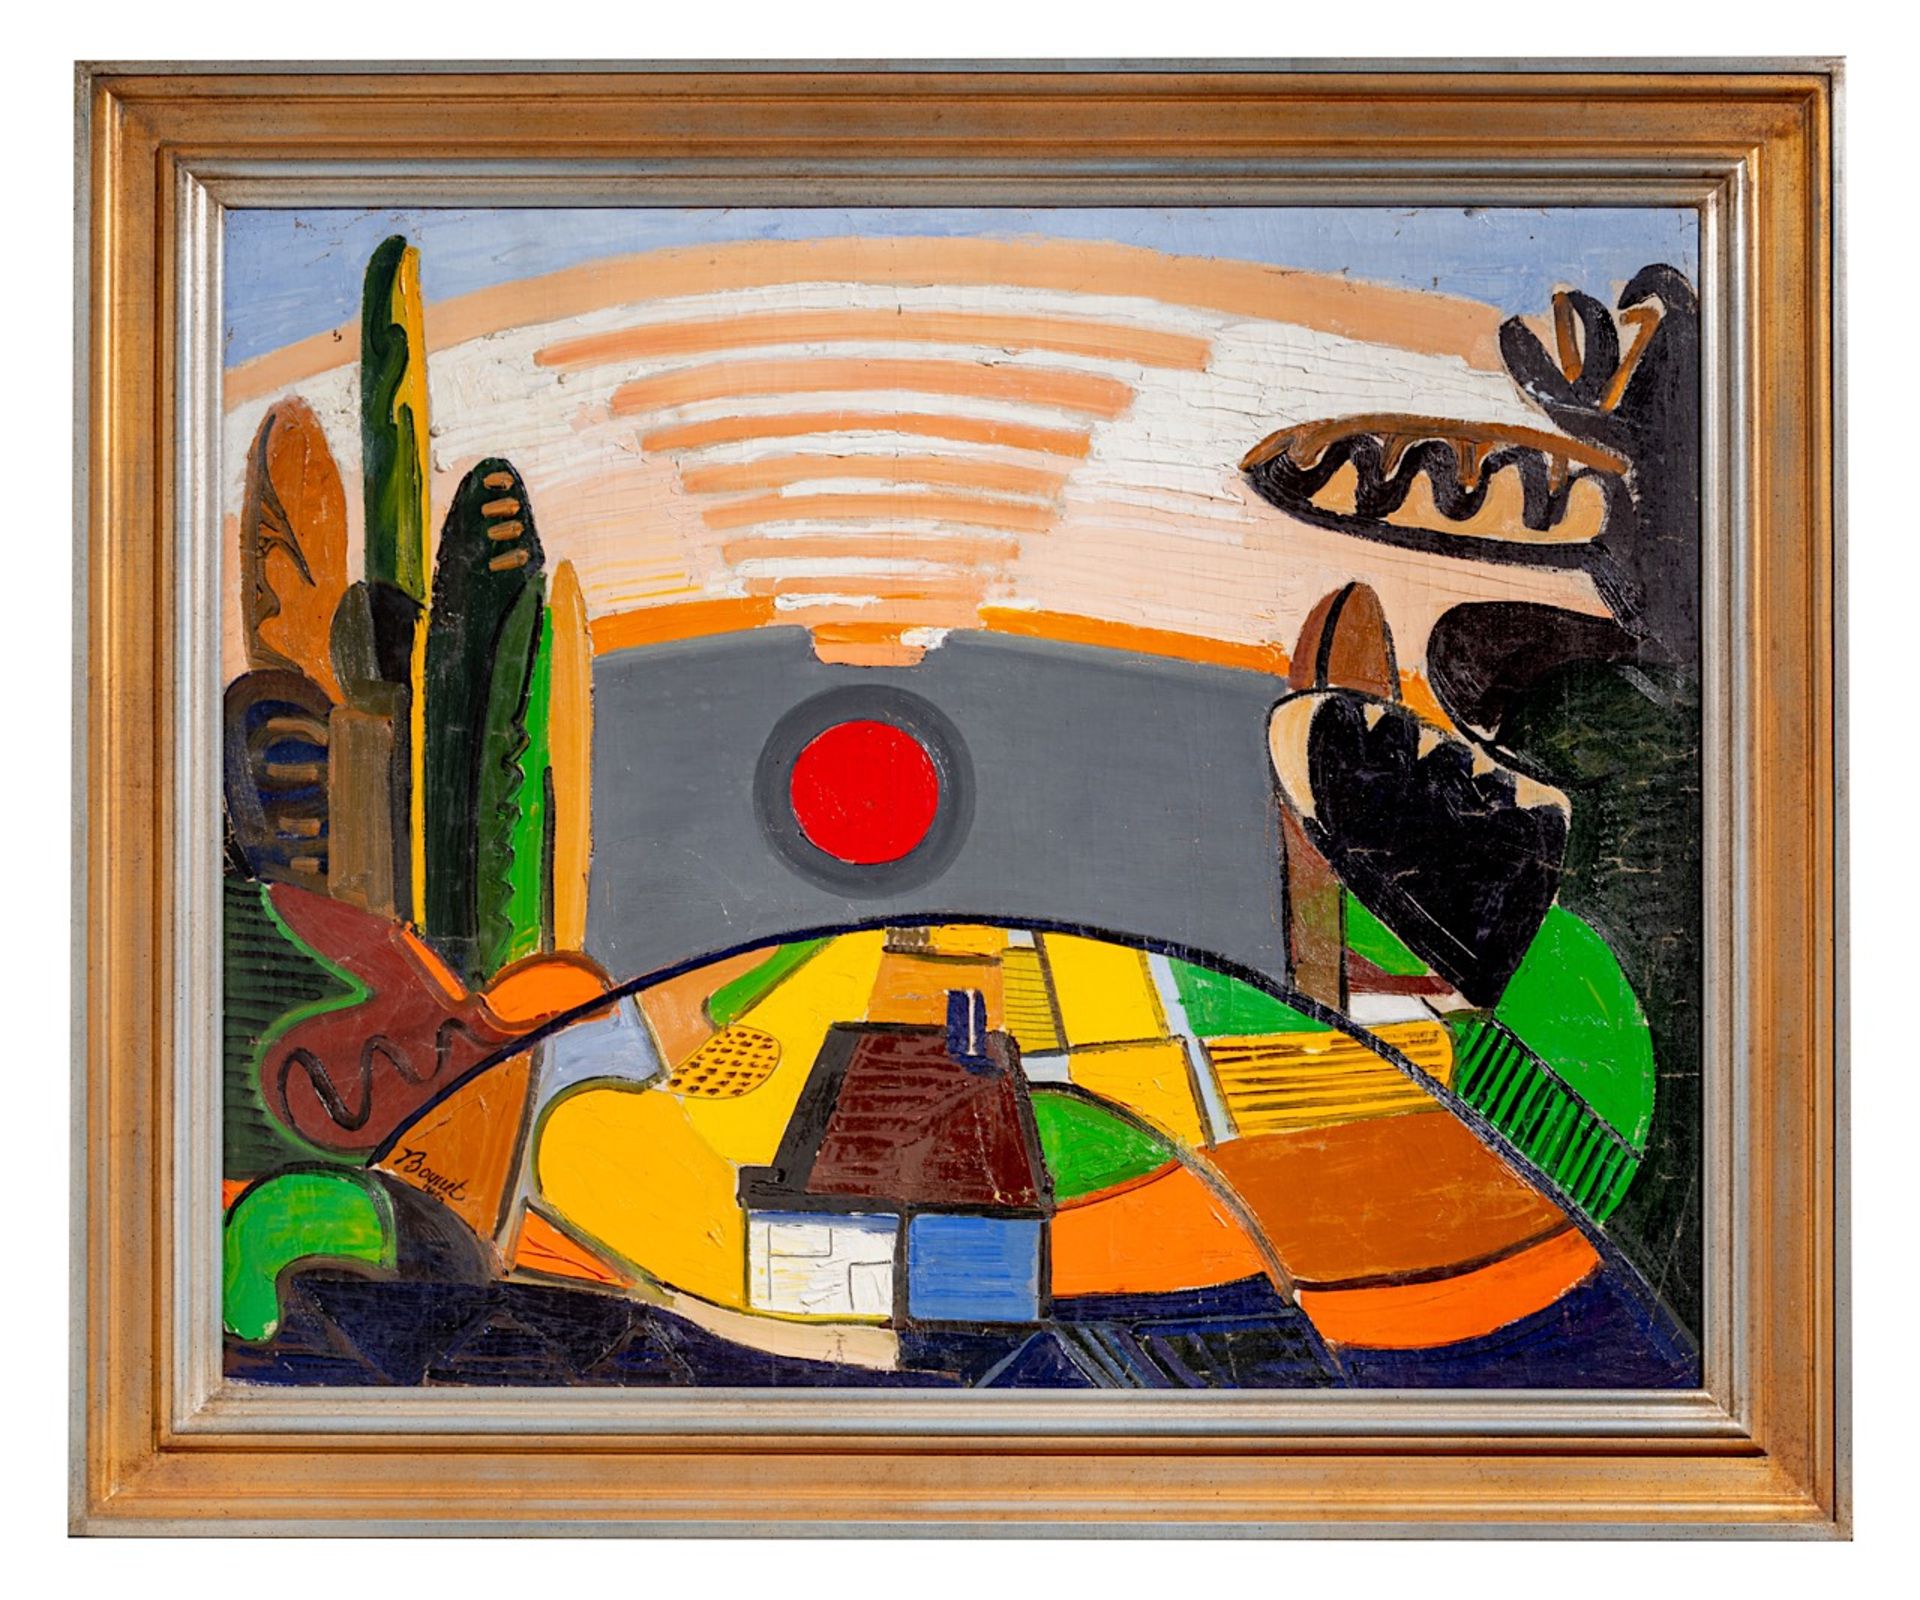 Jean Boquet (1908-1976), colourful landscape, oil on canvas 80 x 100 cm. (31 1/2 x 39.3 in.), Frame: - Image 2 of 4